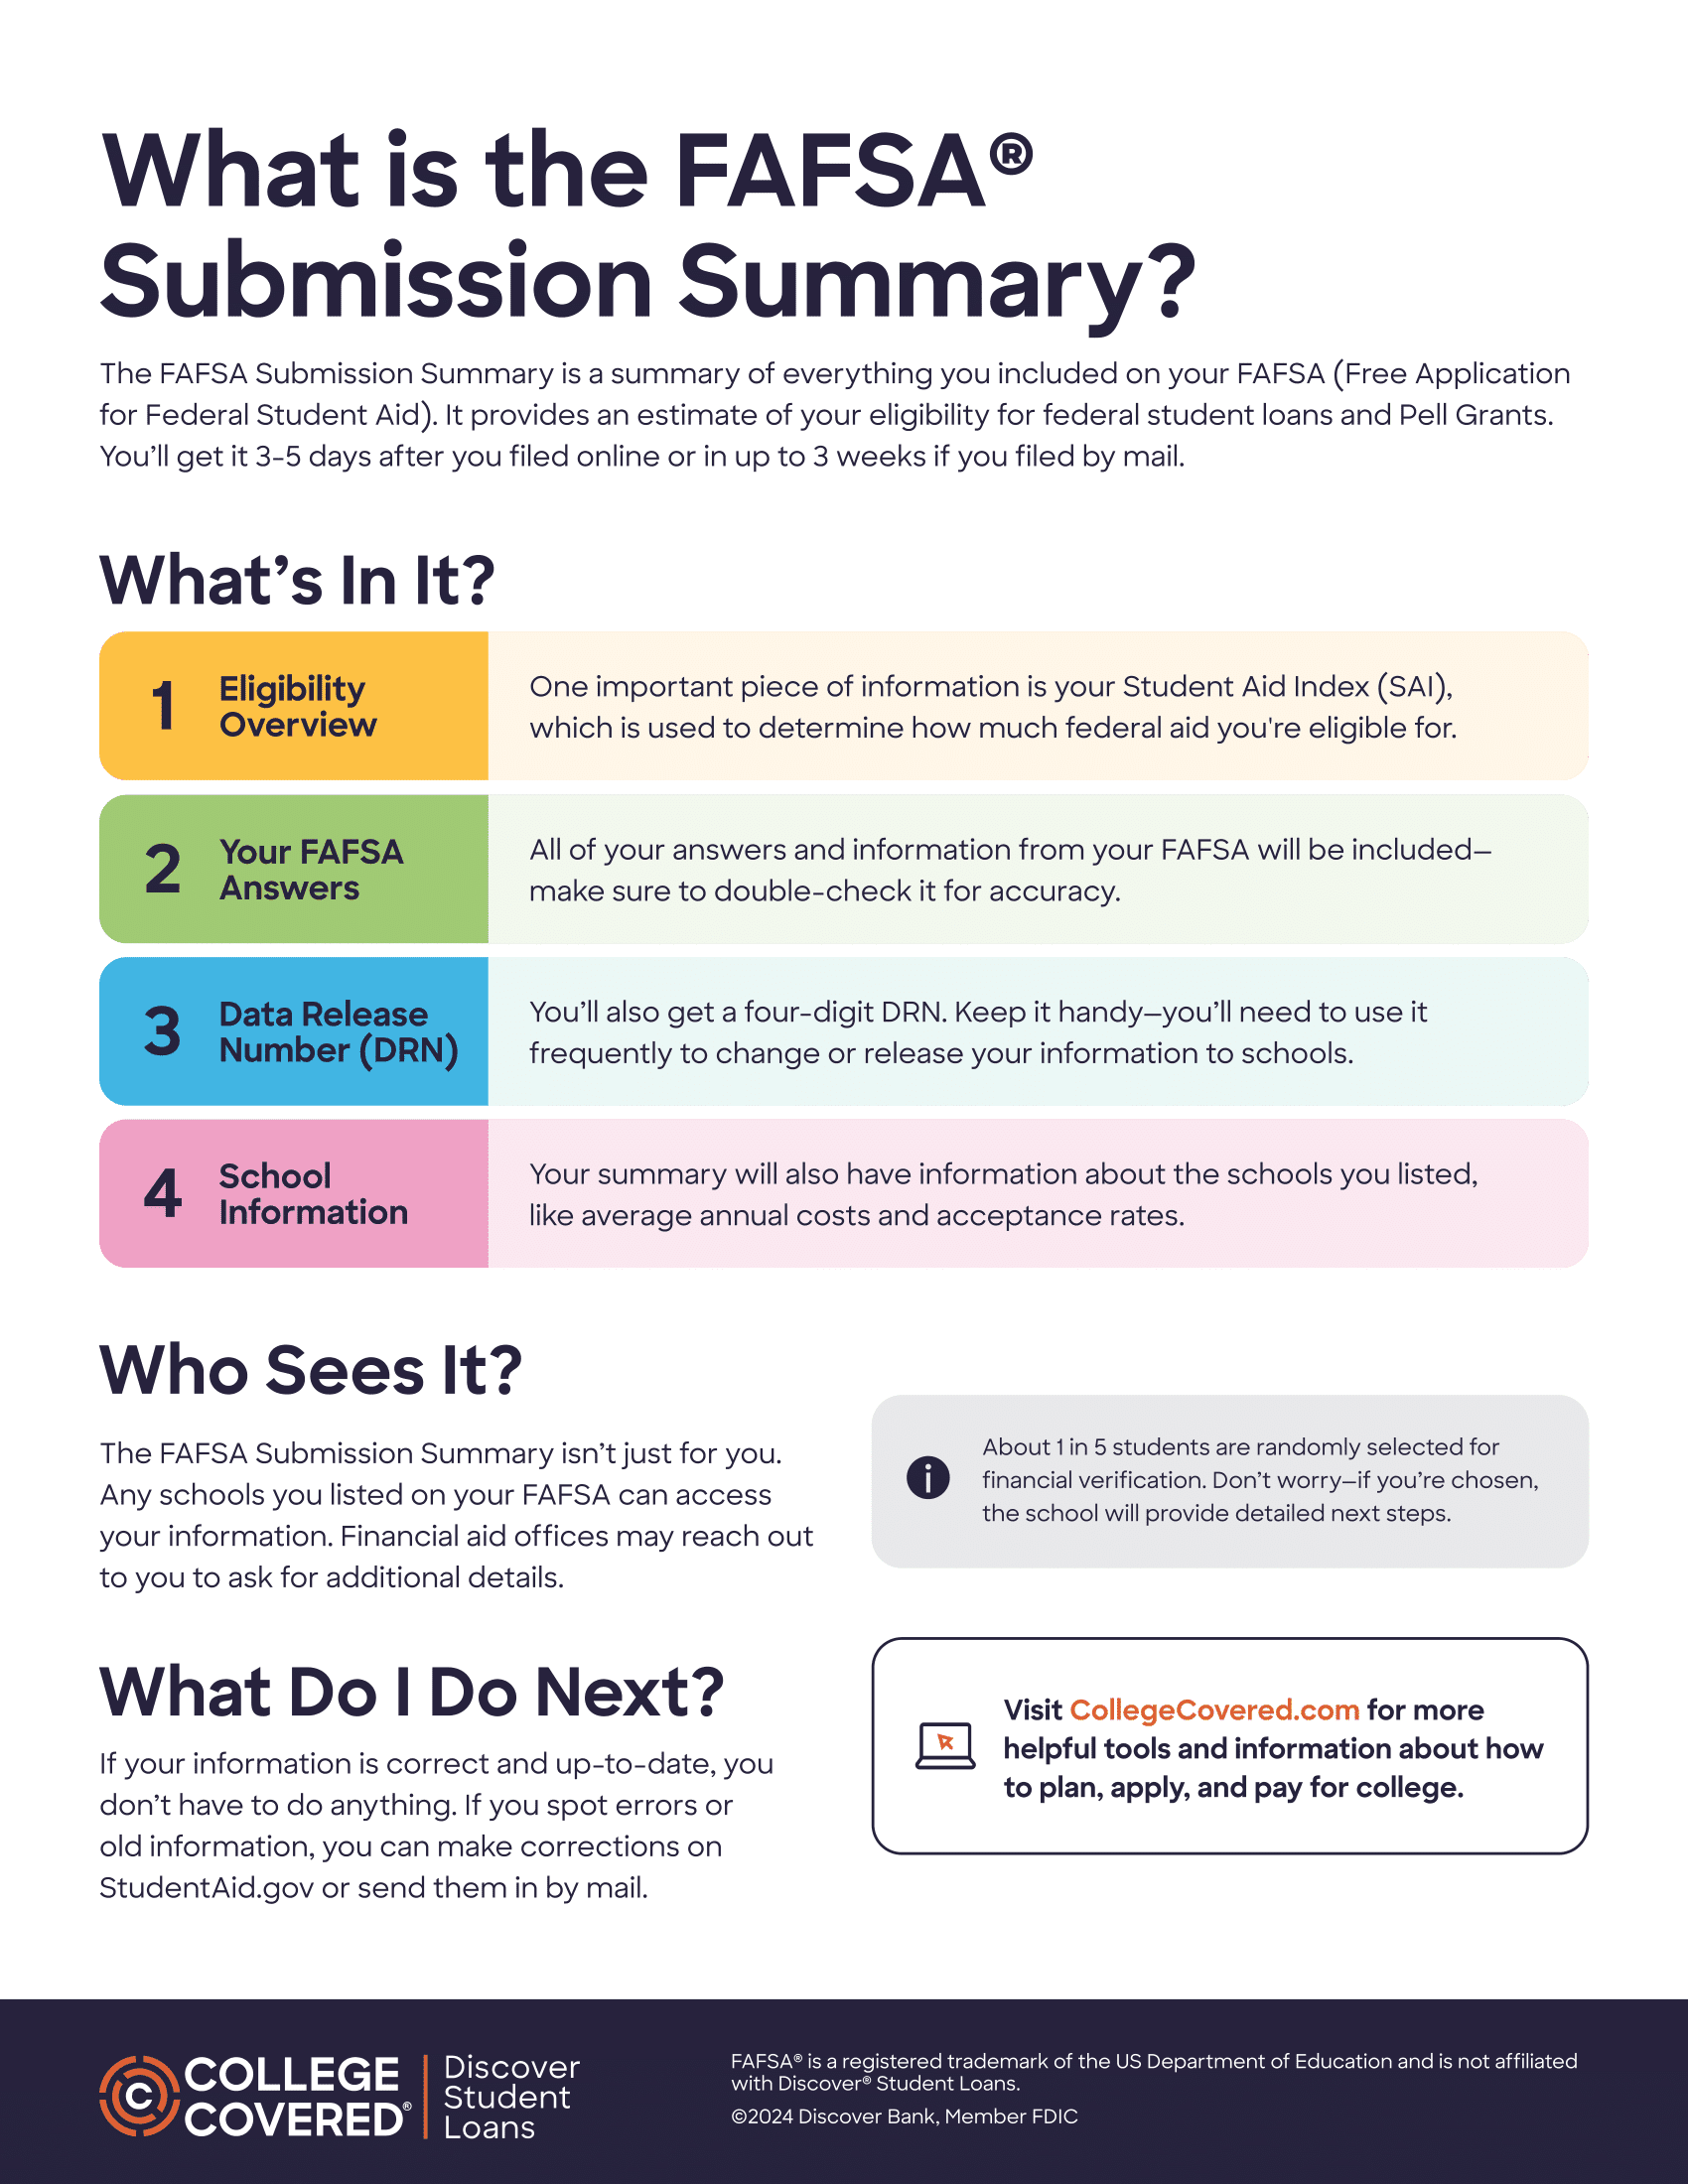 What is the FAFSA<sup>®</sup> Submission Summary